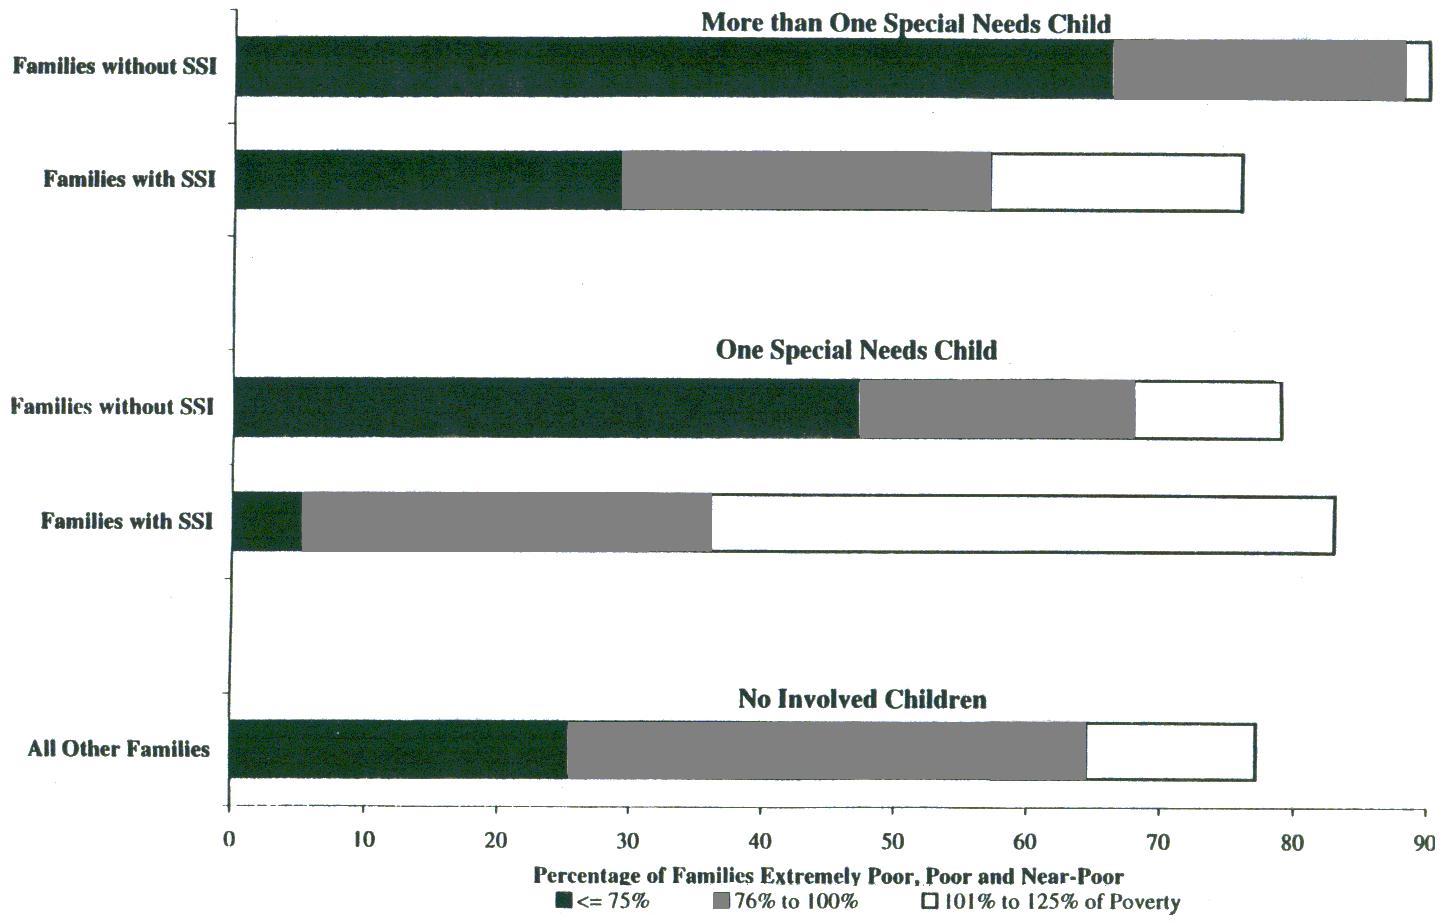 Bar Chart: Families without SSI and Families with SSI for 